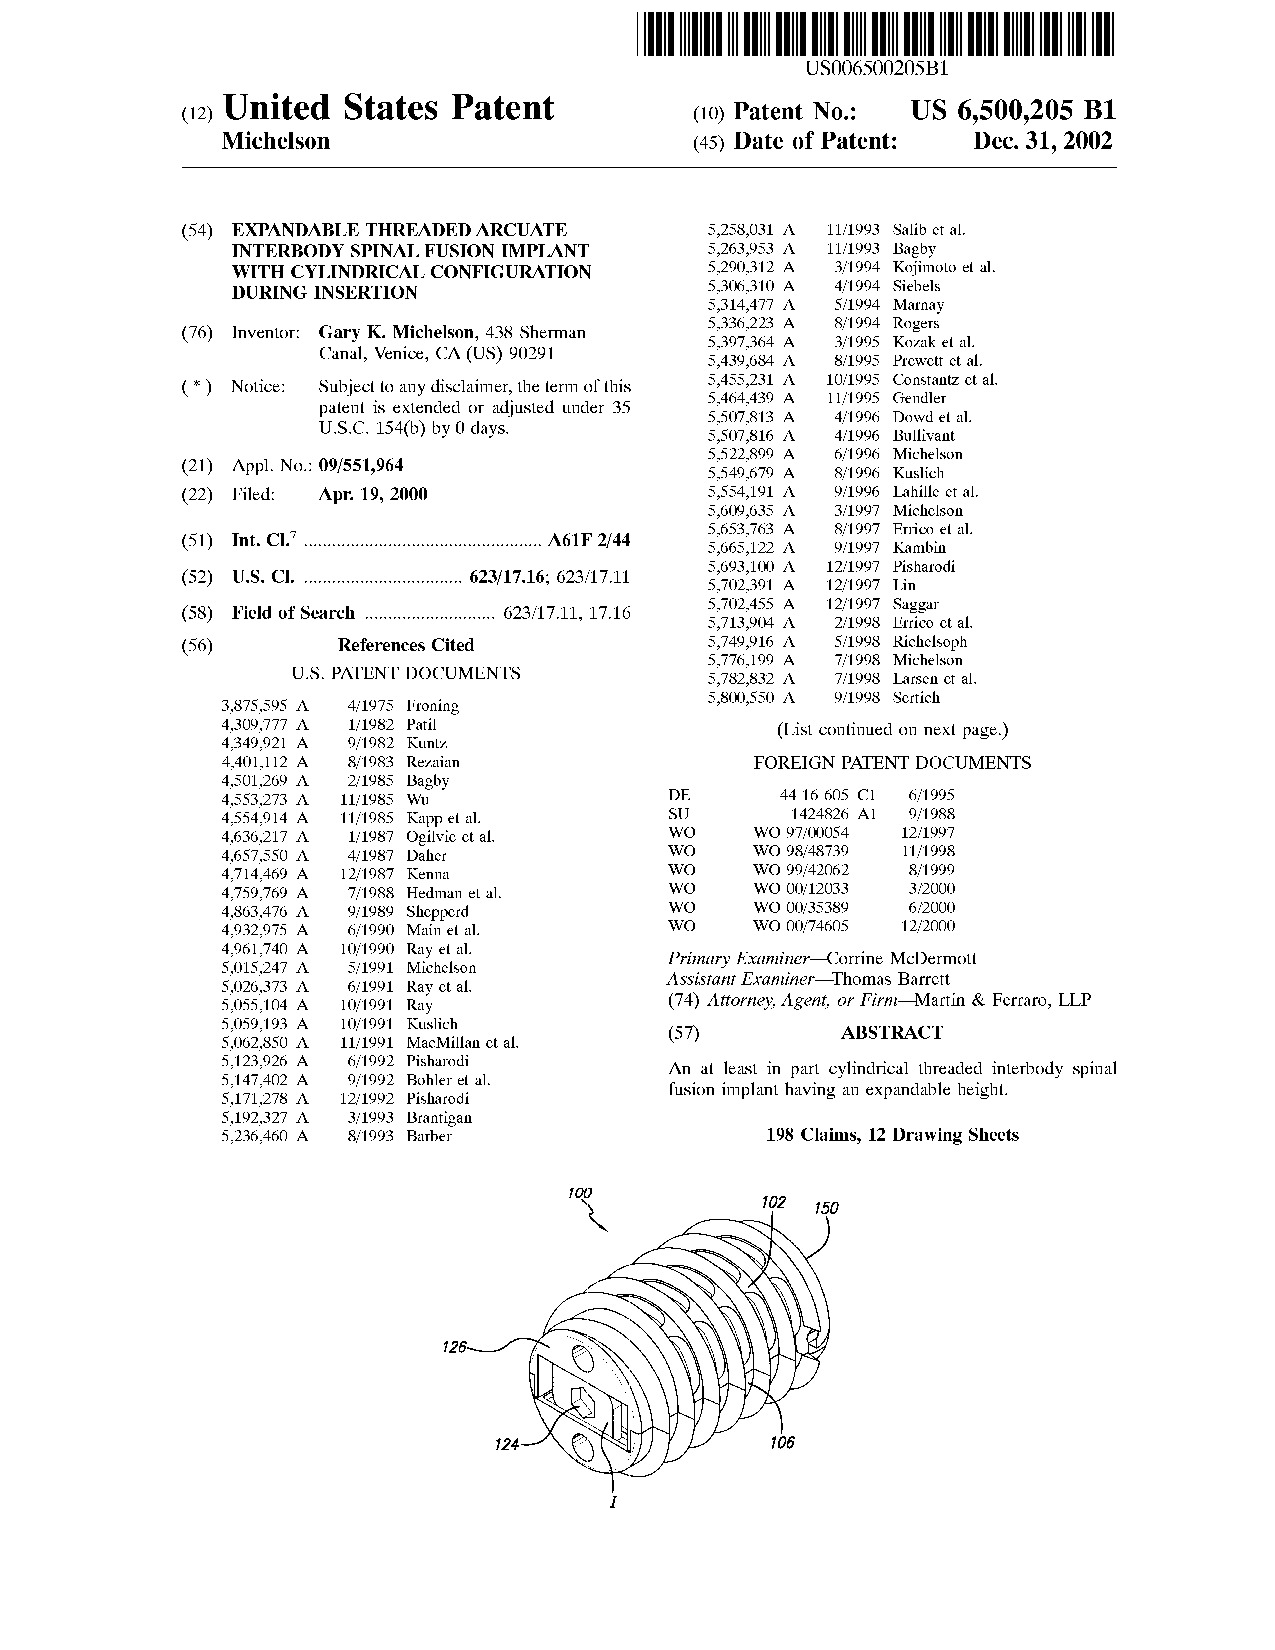 Expandable threaded arcuate interbody spinal fusion implant with     cylindrical configuration during insertion - Patent 6,500,205